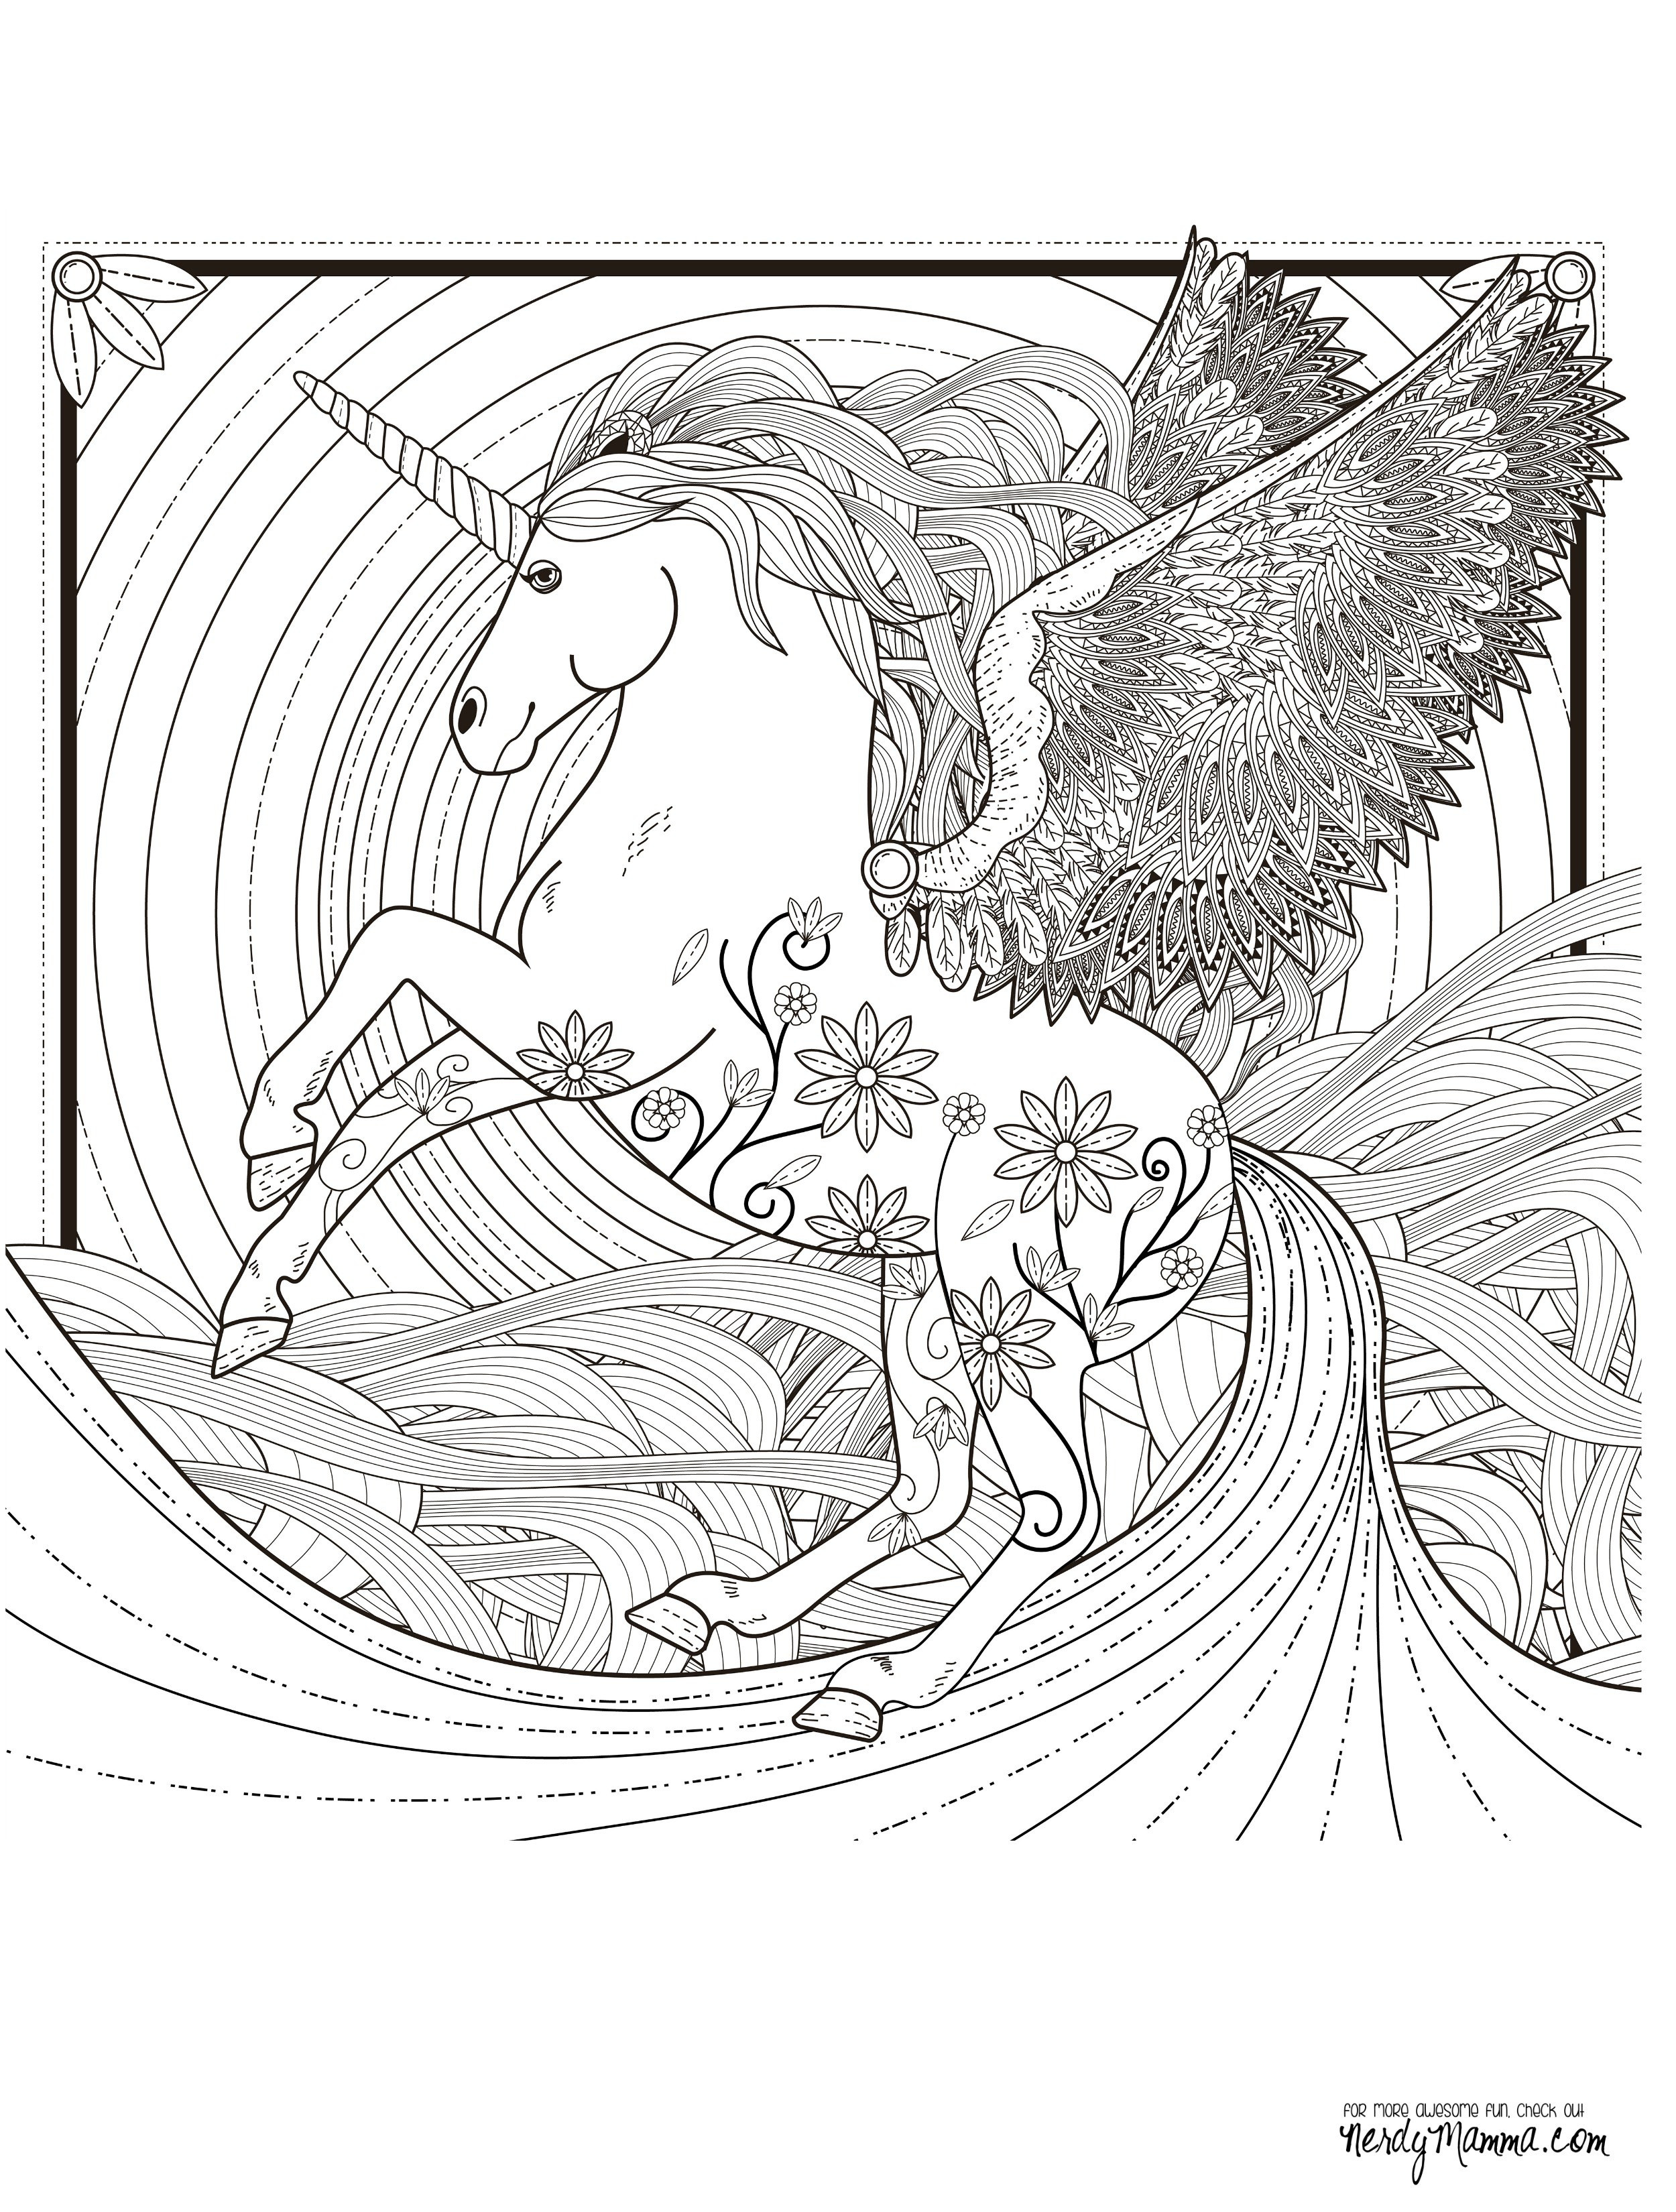 Adult Coloring Pages Unicorn
 11 Free Printable Adult Coloring Pages